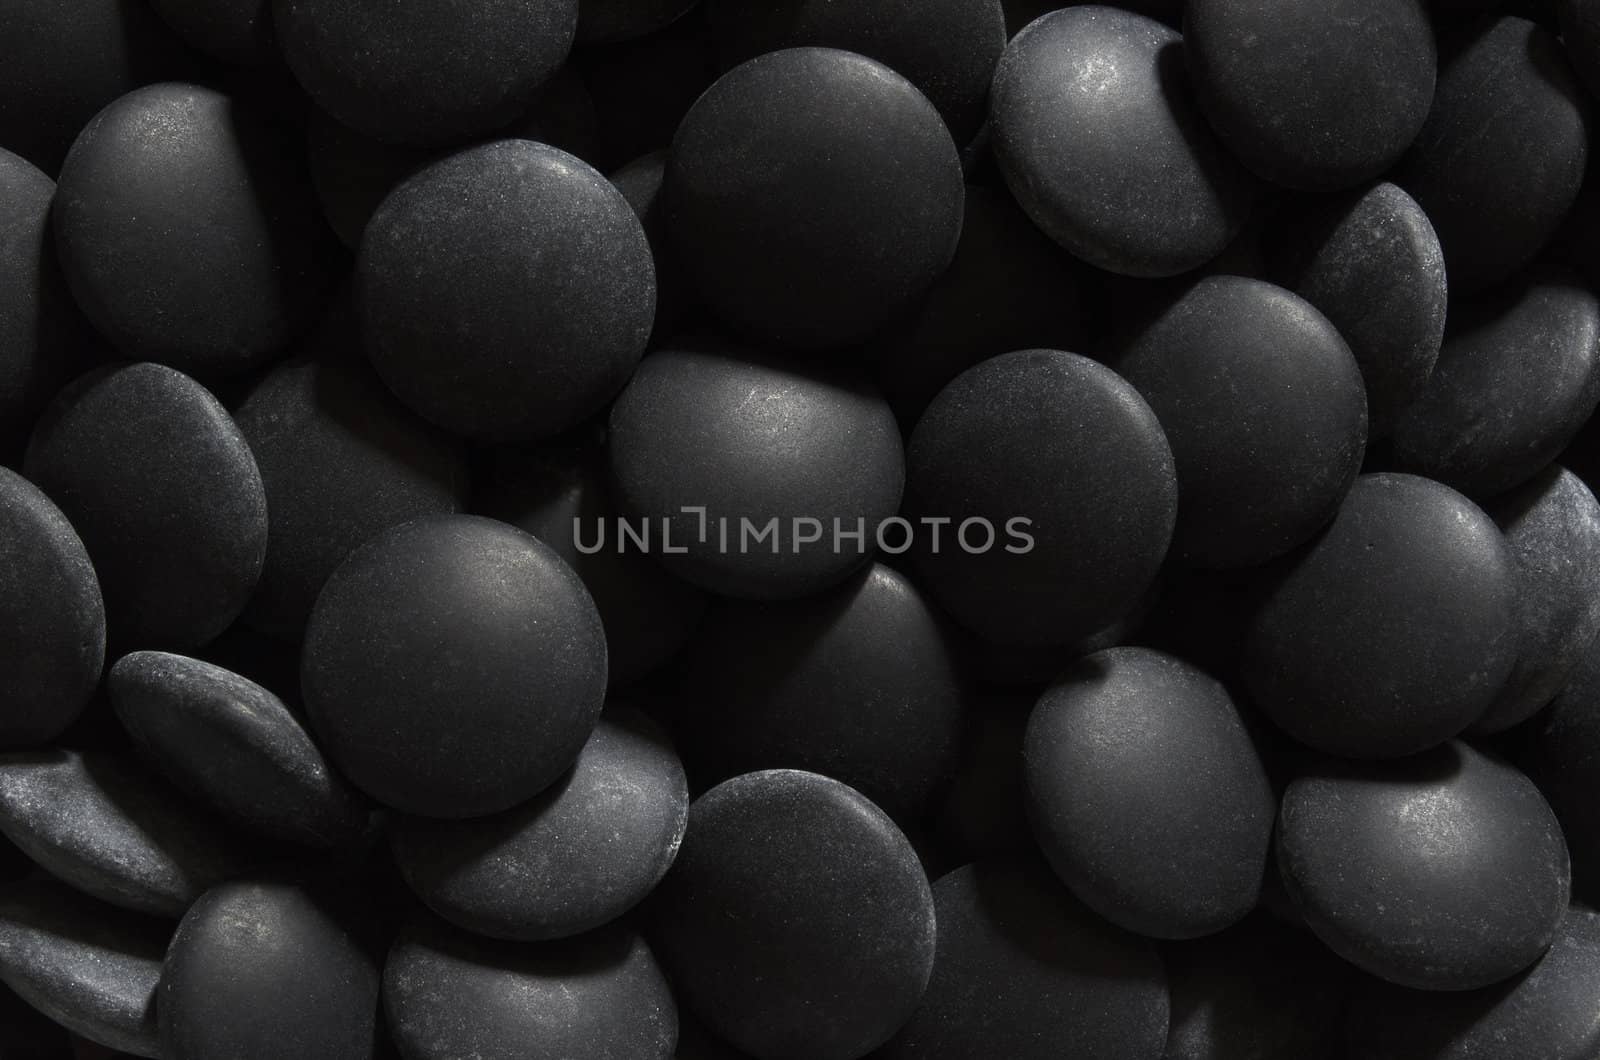 A pile of black stones, used in the traditional Chinese strategy game go.